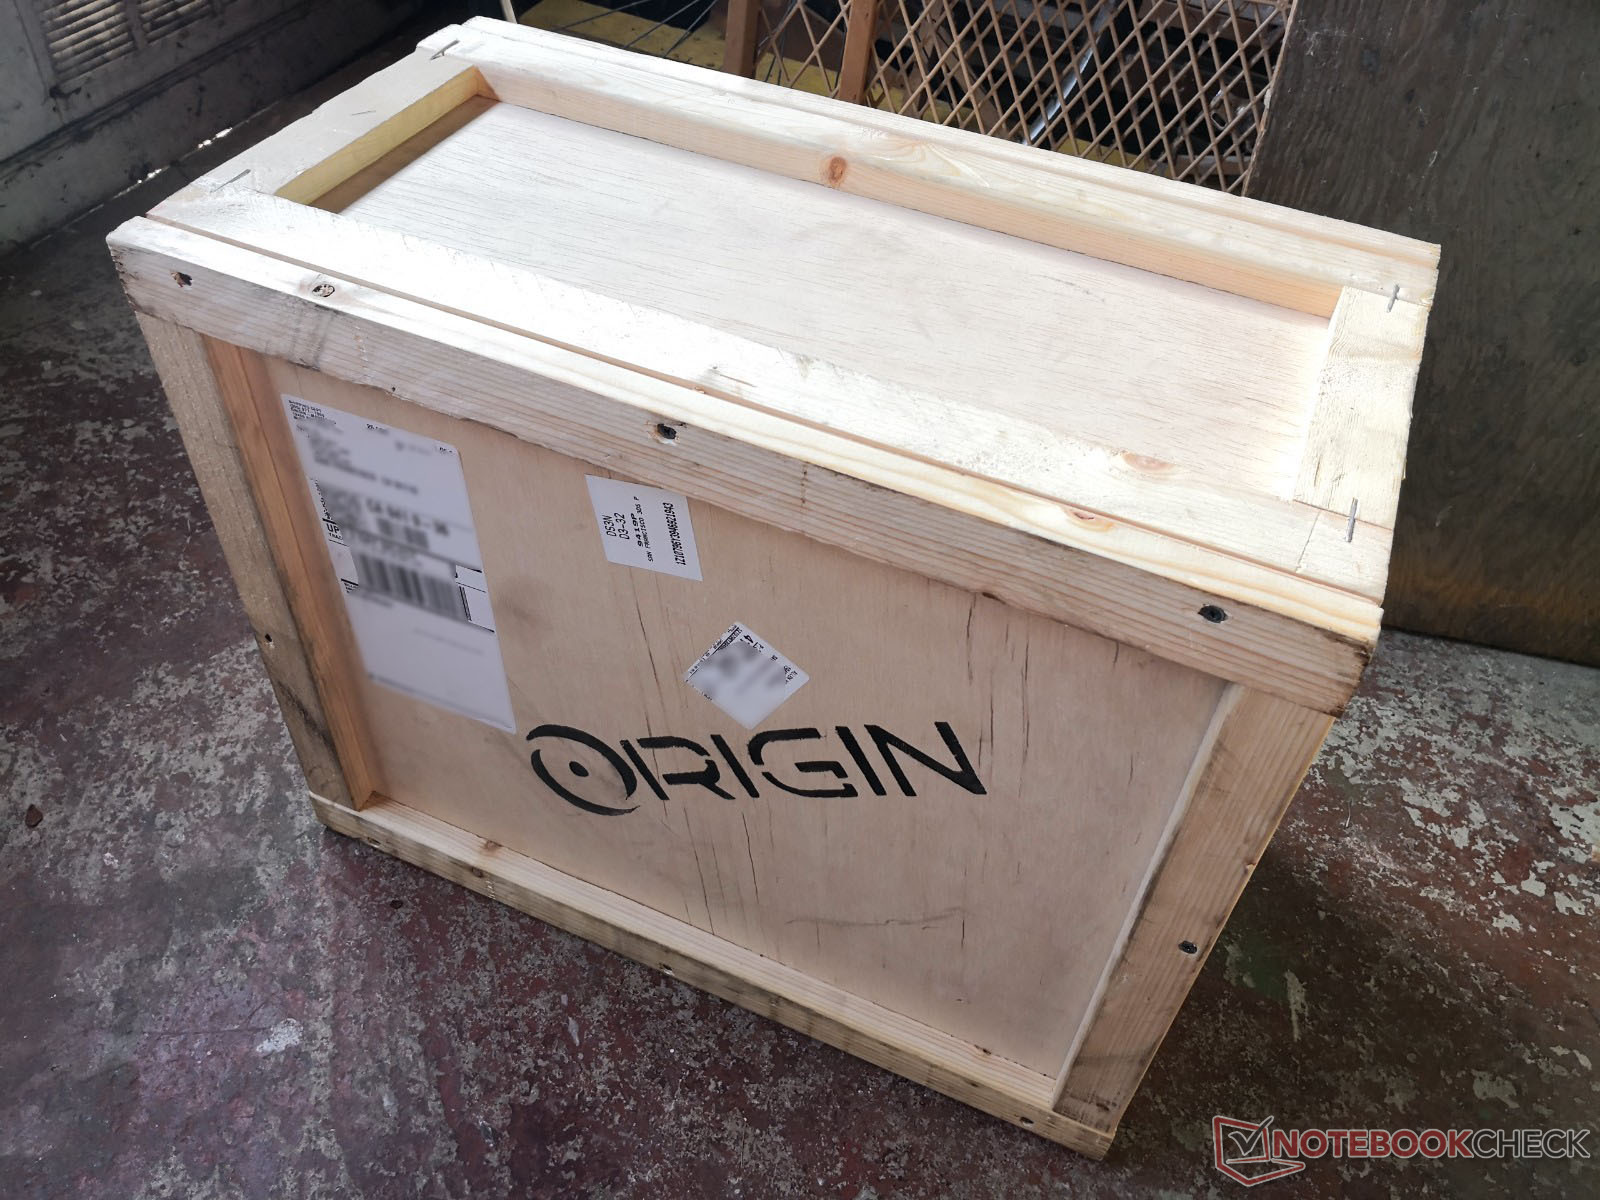 Origin PC ships its PCs in cool wooden crates - NotebookCheck.net News A Manufacturer Ships Its Product In Boxes With Edges